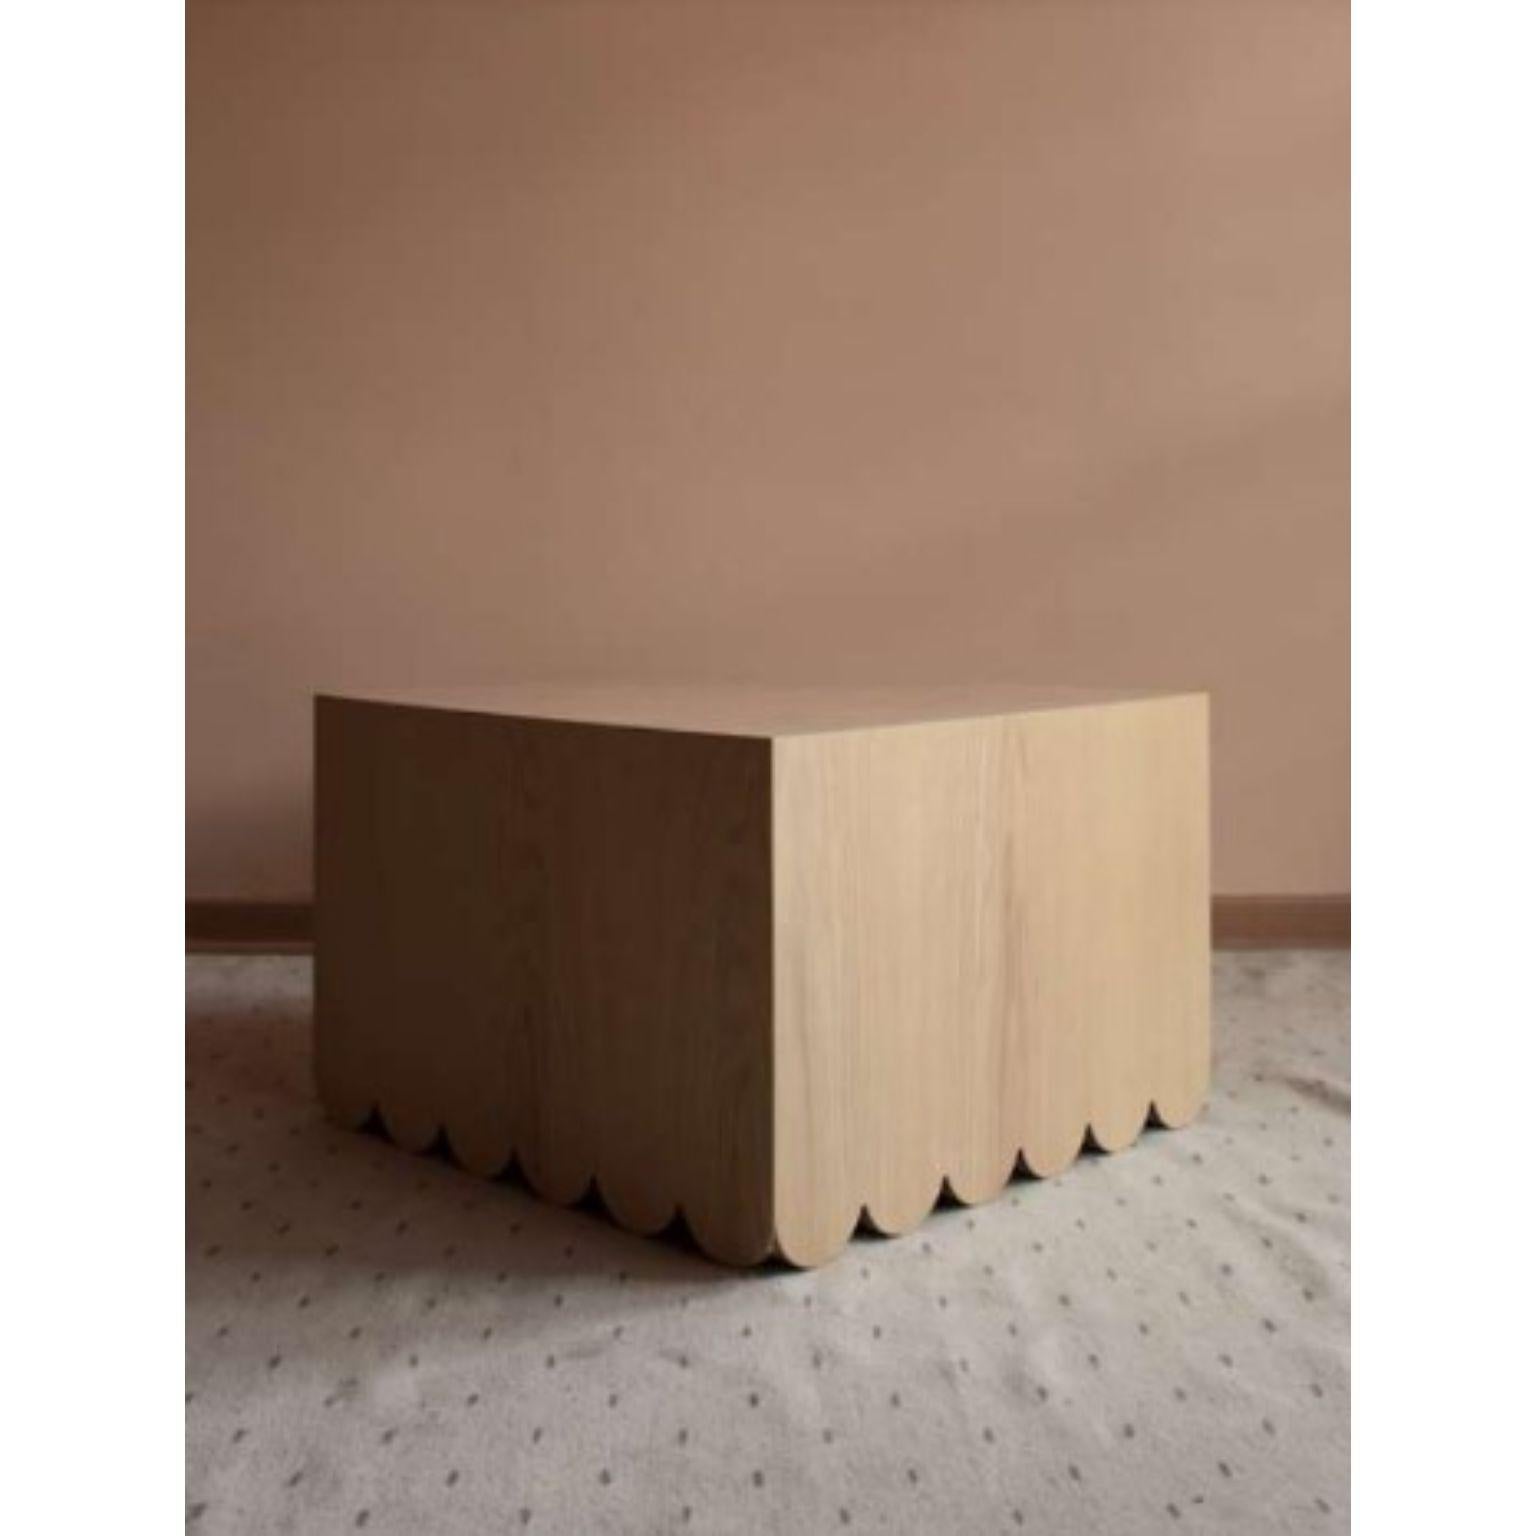 Fantasma coffee table by Andres Gutierrez
Dimensions: D 60 x W 60 x H 40 cm
Materials: Solid white oak board.


Andrés Gutiérrez founded A-G Studio, a residential and commercial interior design firm in 2012, from where he has participated in